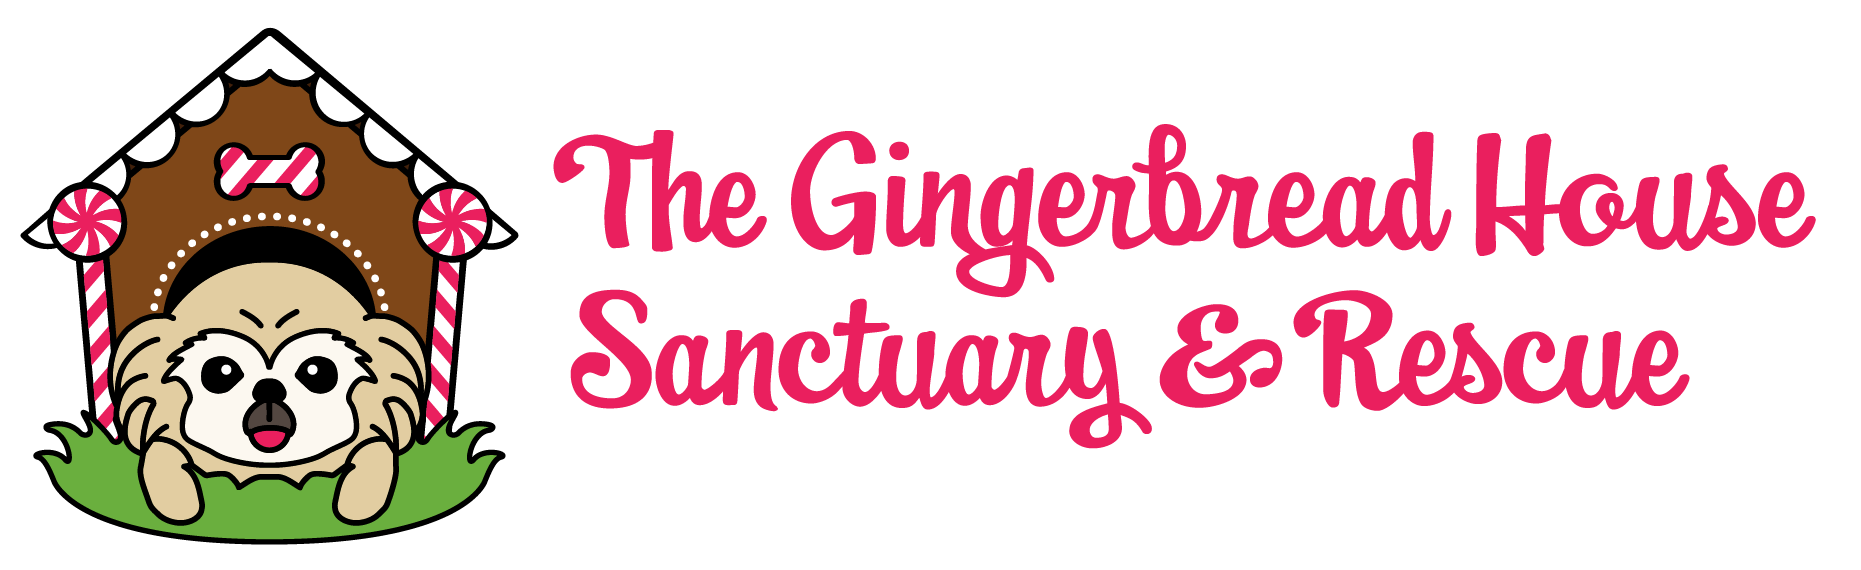 The Gingerbread House Sanctuary & Rescue